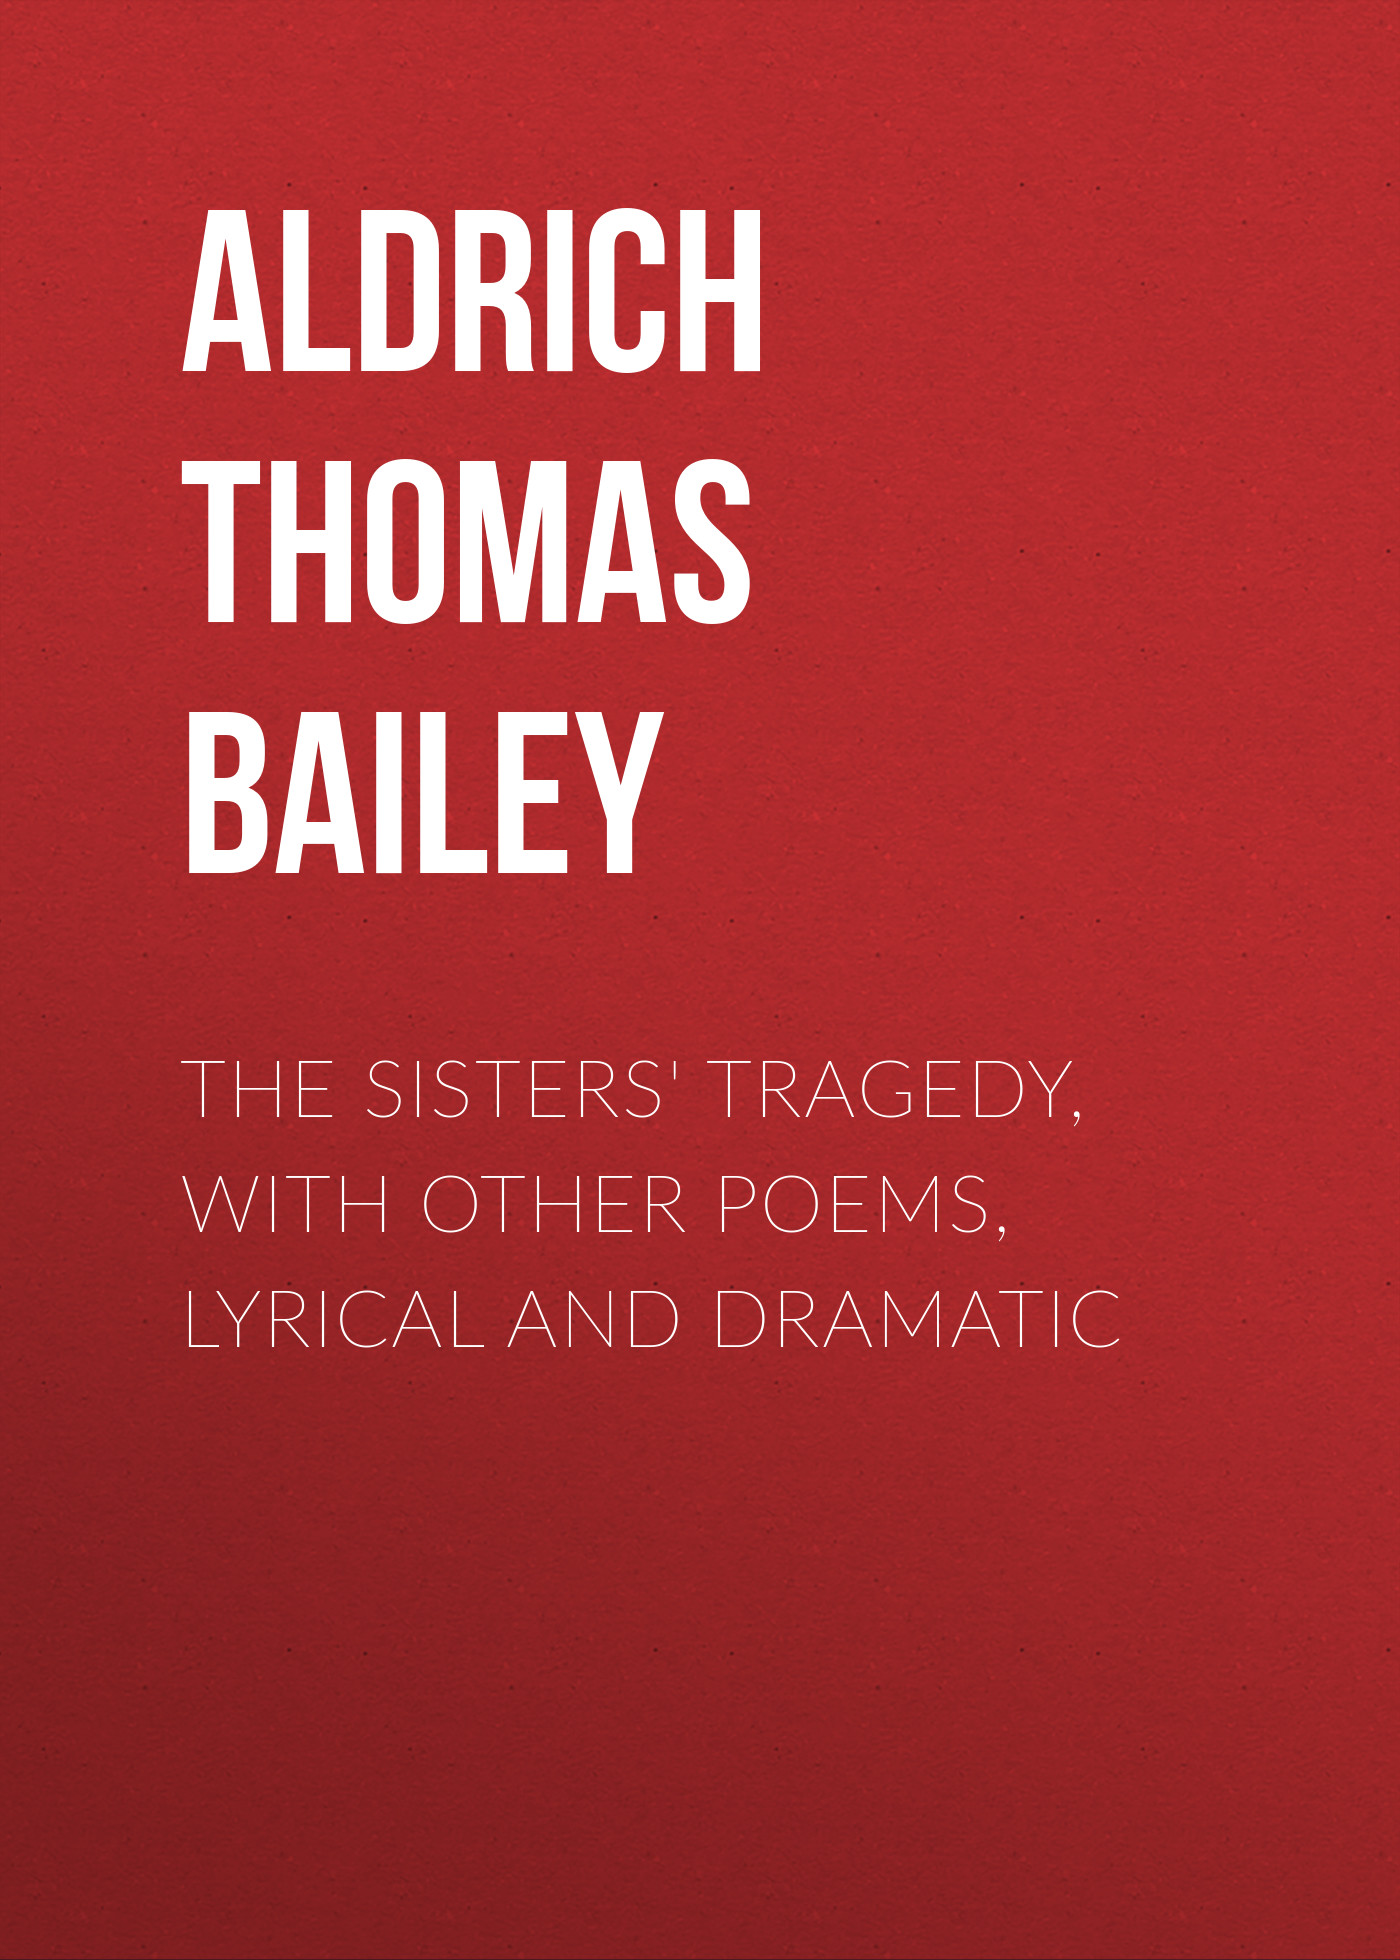 The Sisters'Tragedy, with Other Poems, Lyrical and Dramatic